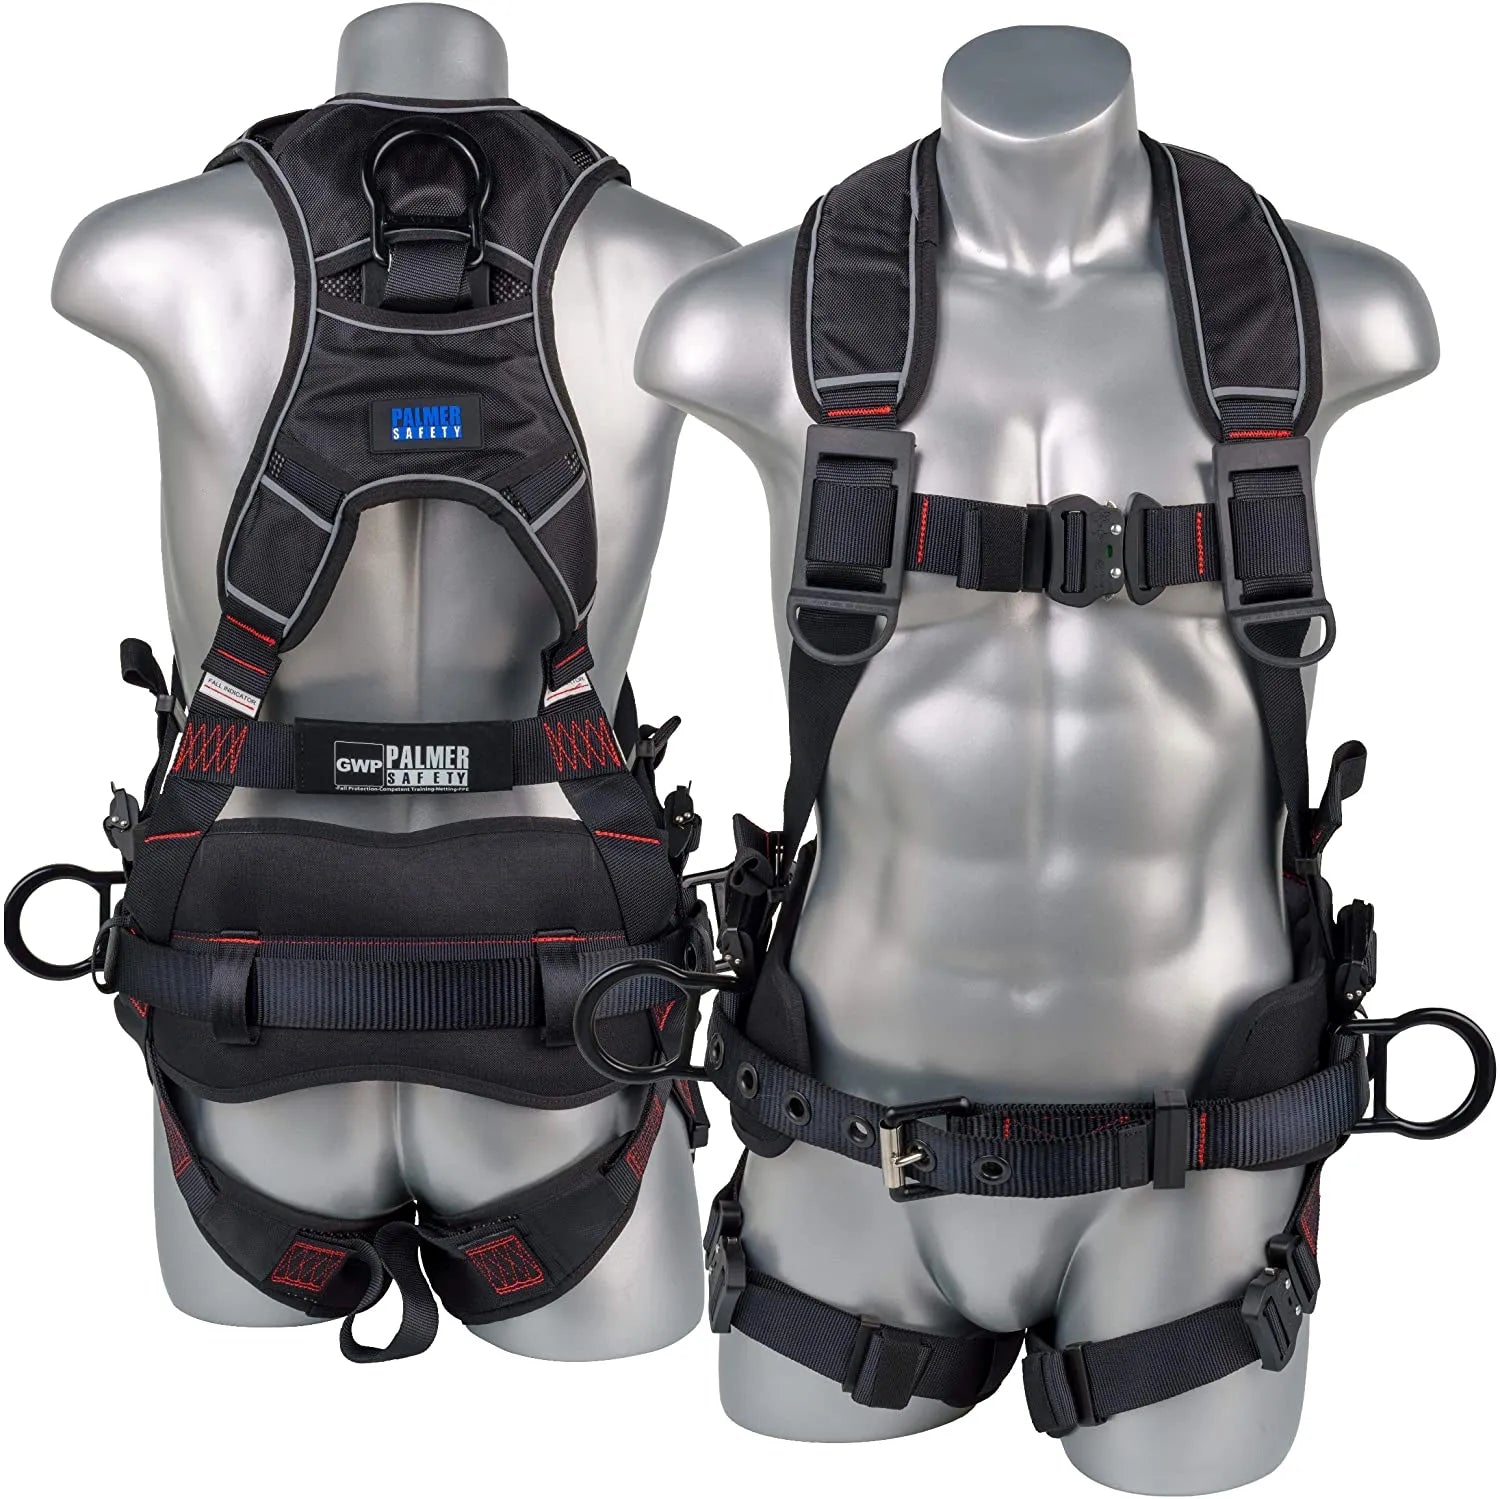 Construction Safety Harness 5 Point, QCB, Padded Back, Grommet Legs - Defender Safety